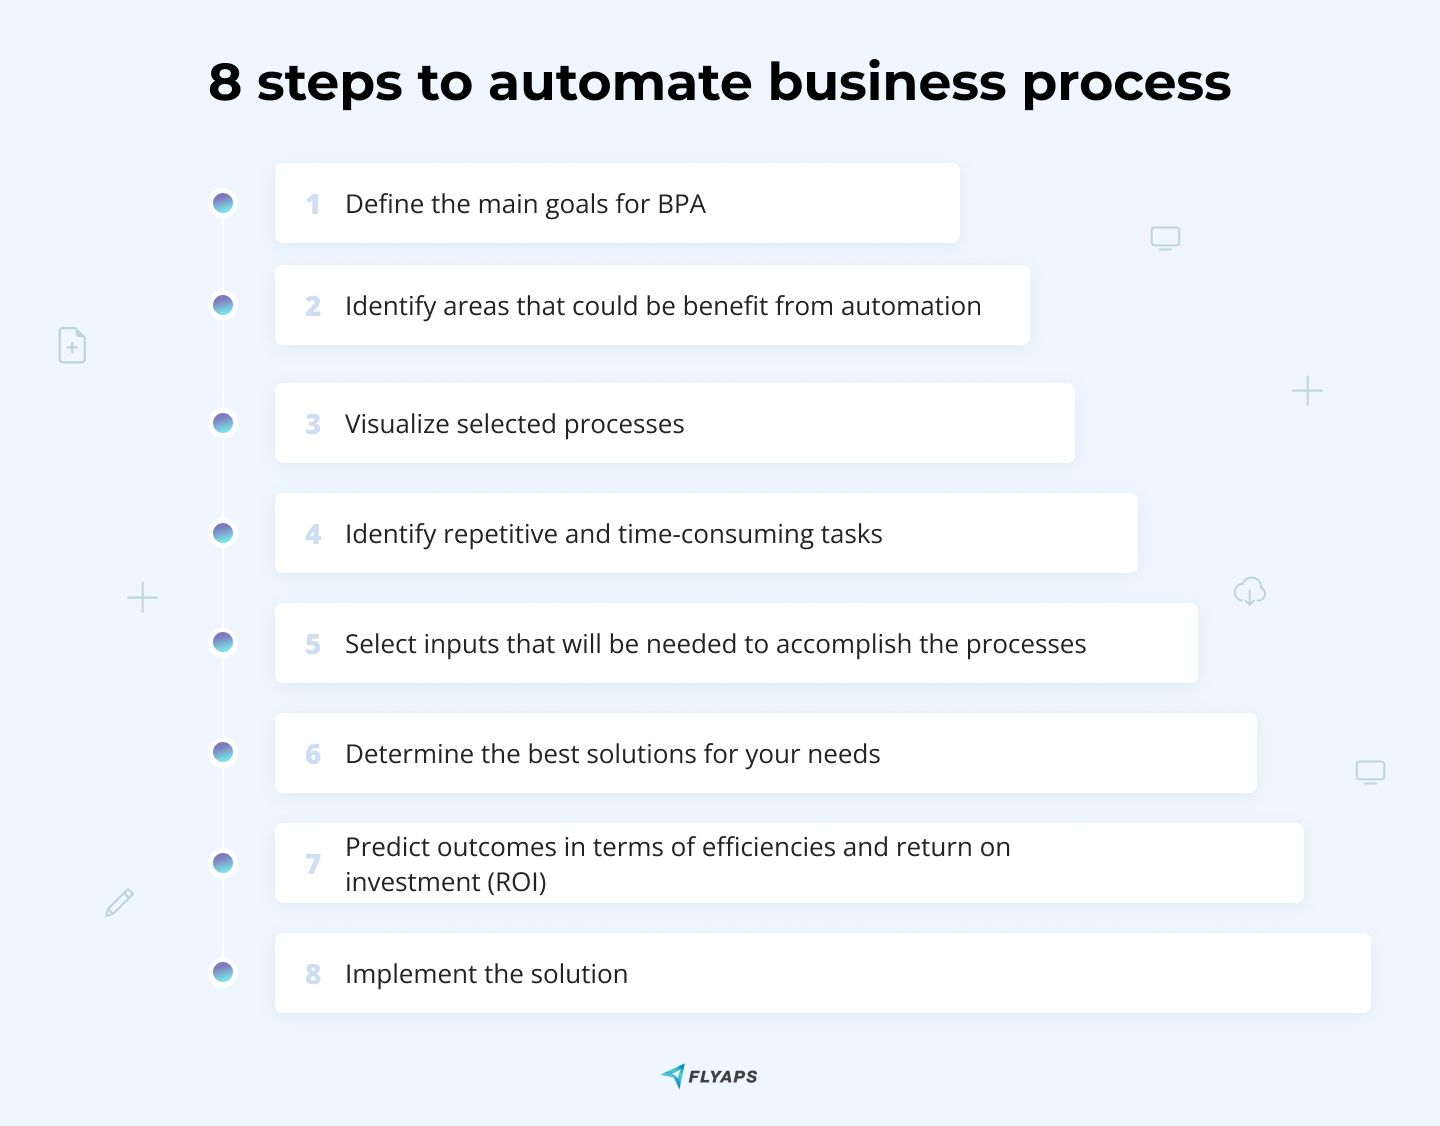 Steps how to automate business process